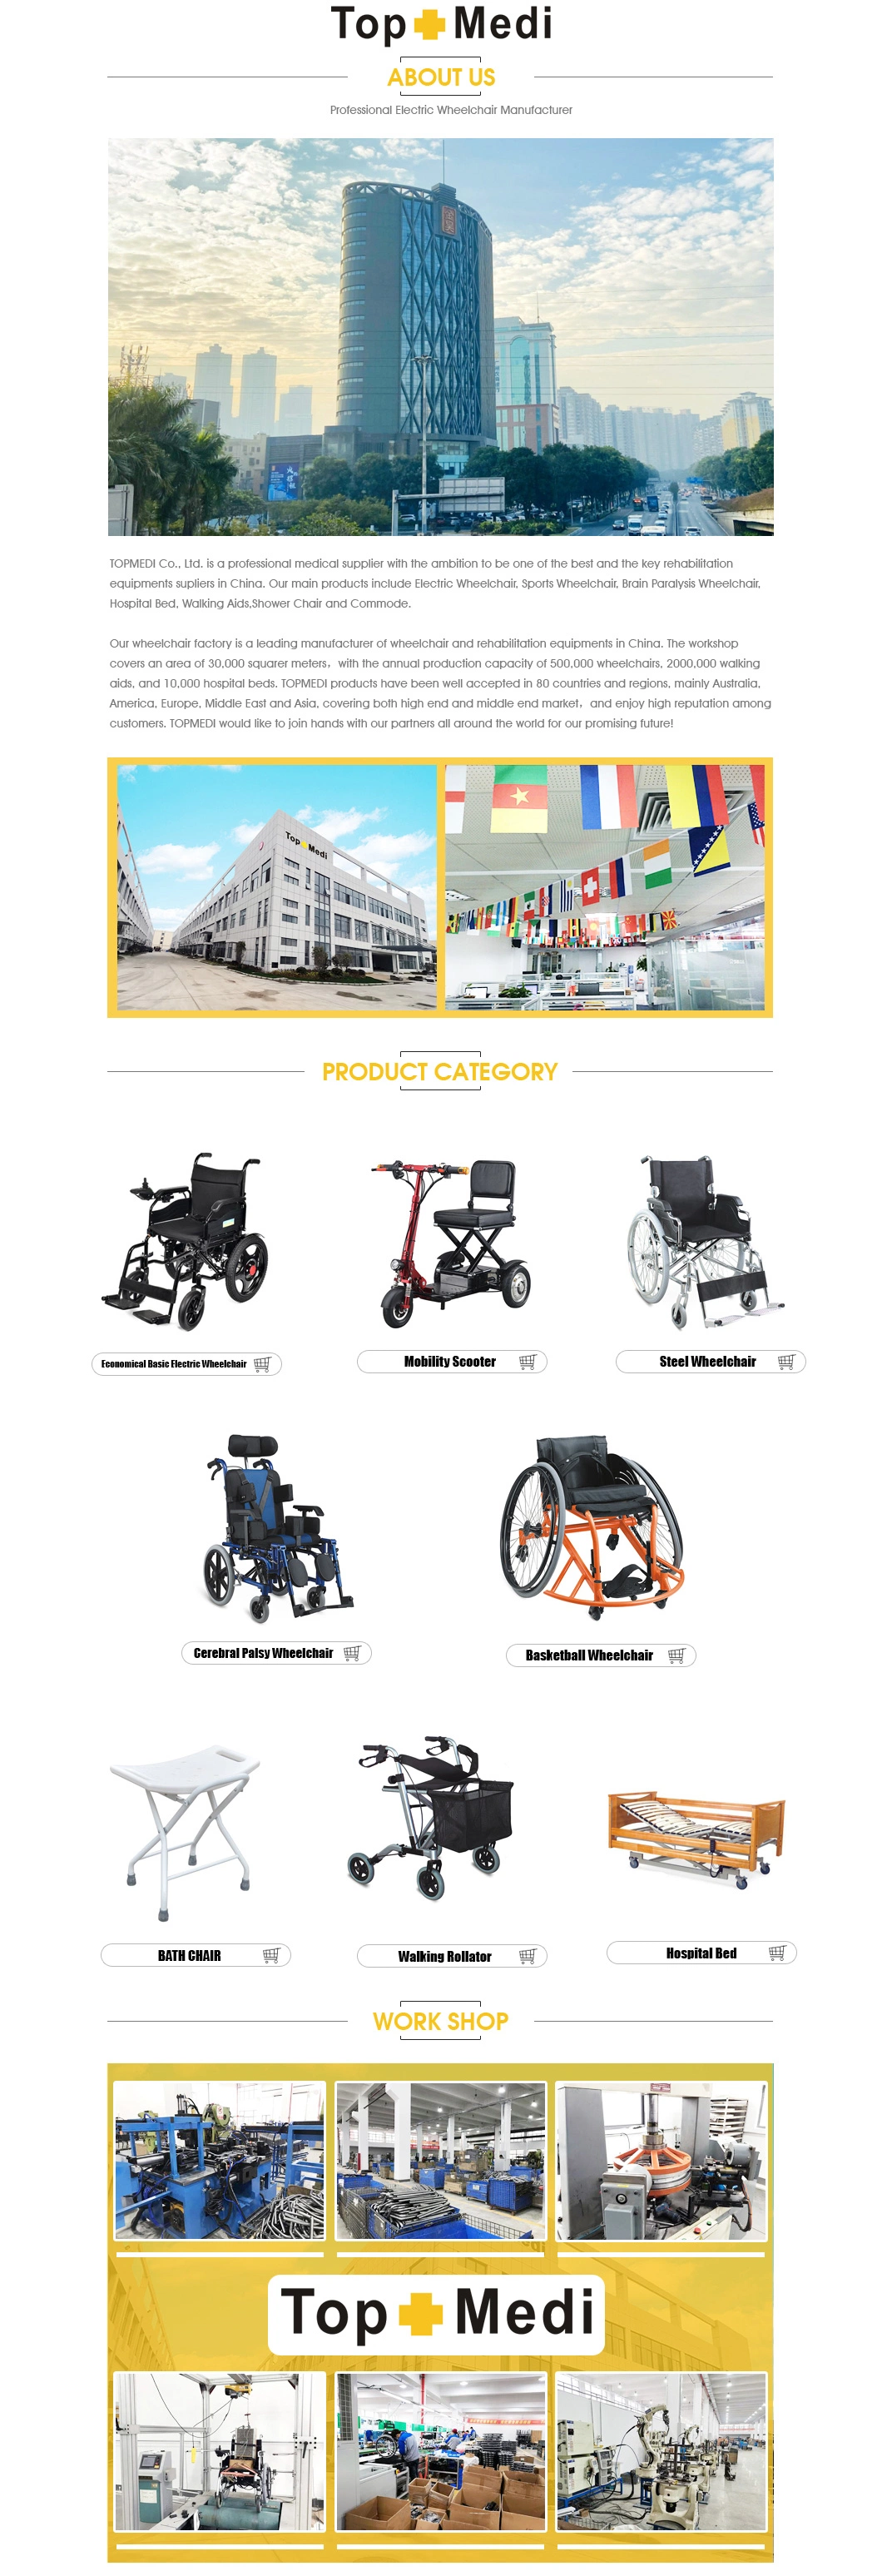 Folding Pediatric Wheelchair for Cp Children with All Terrain Capability and Cerebral Palsy Child Seat and Reclining Commode Seat for Comfortable Travel